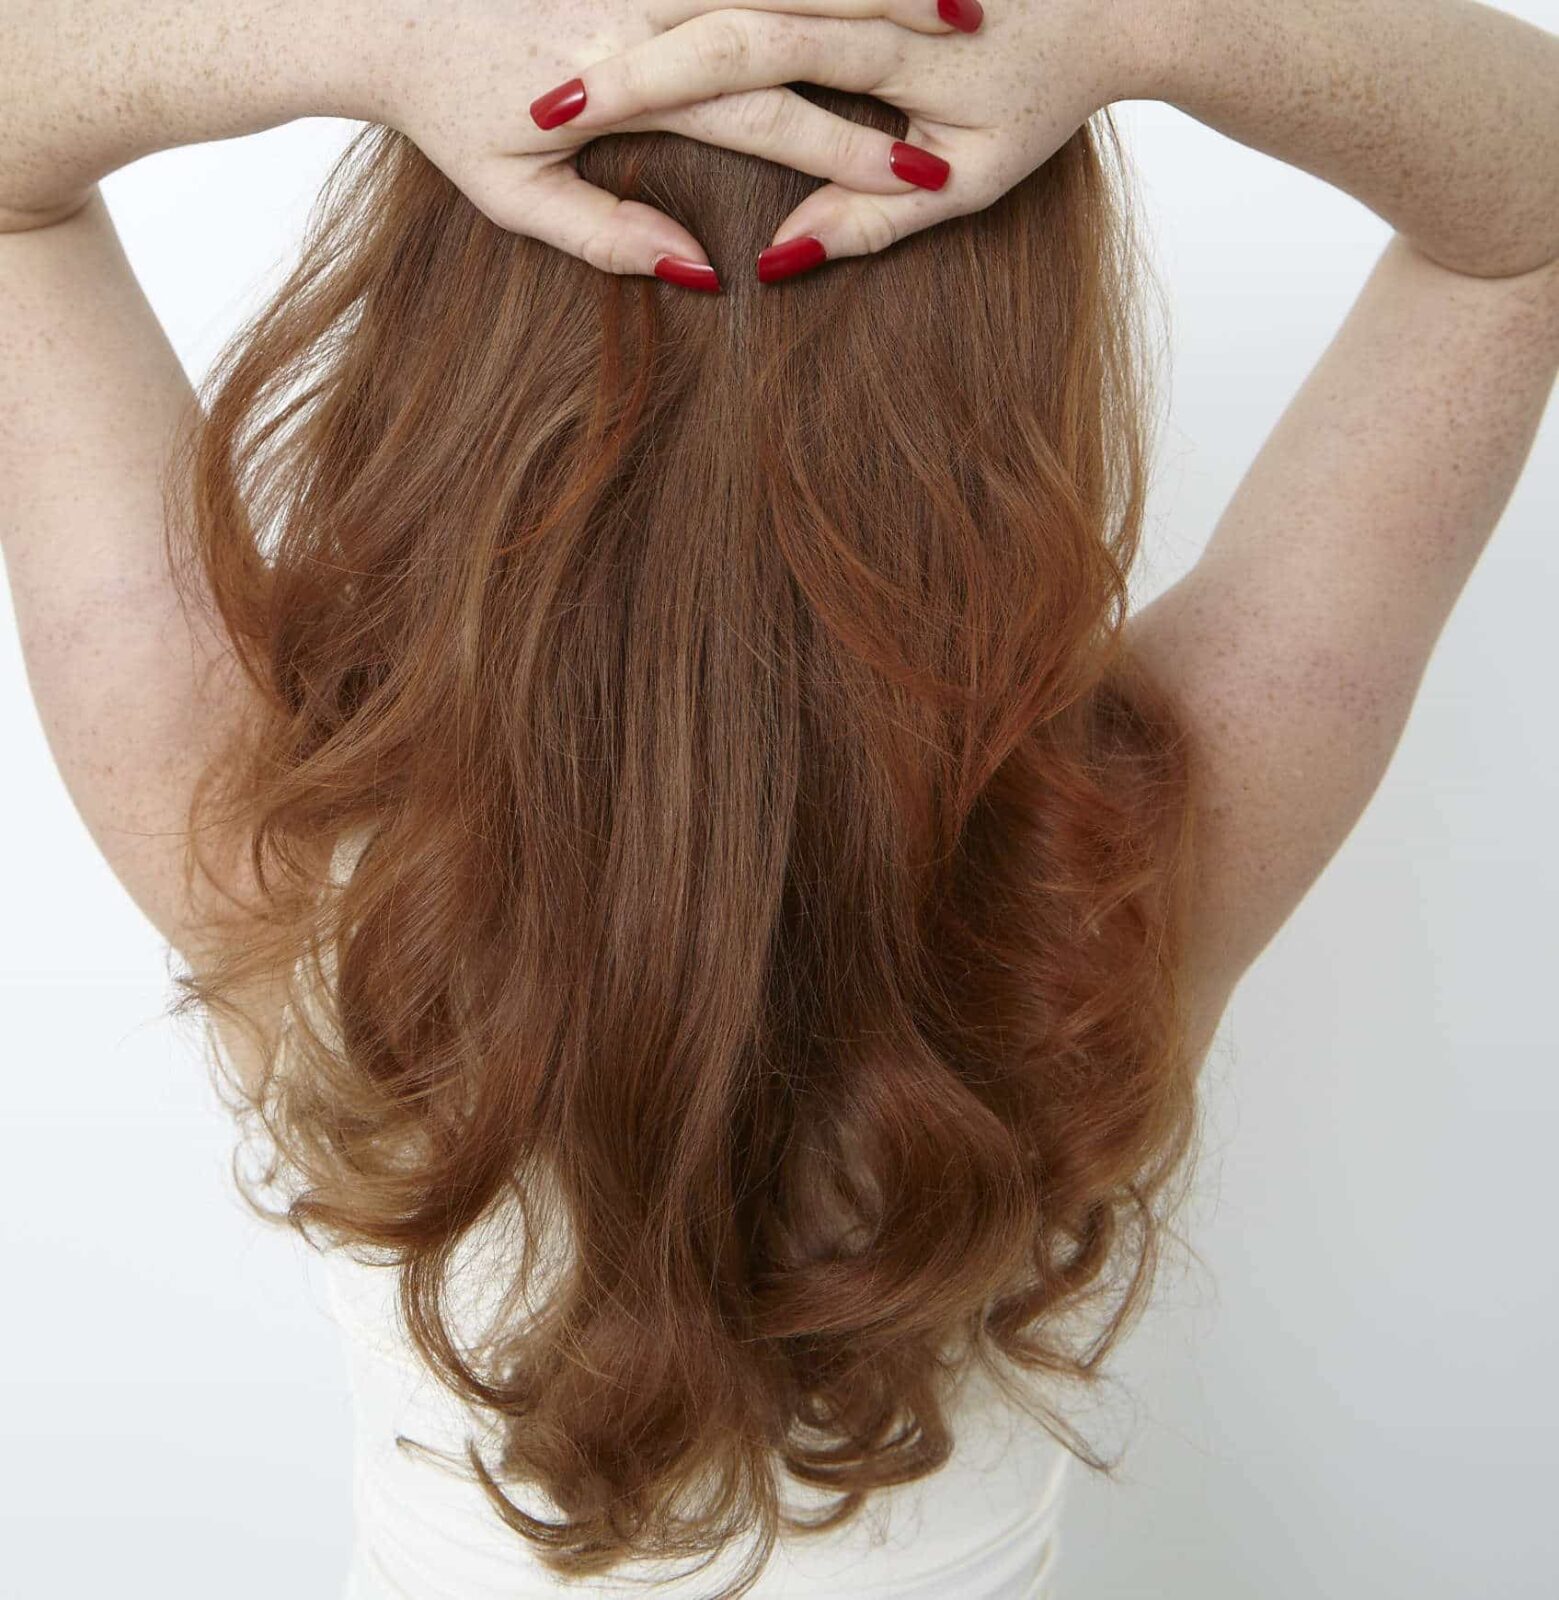 The 6 Best Ways To Keep Red Hair From Fading - Fading Red Hair